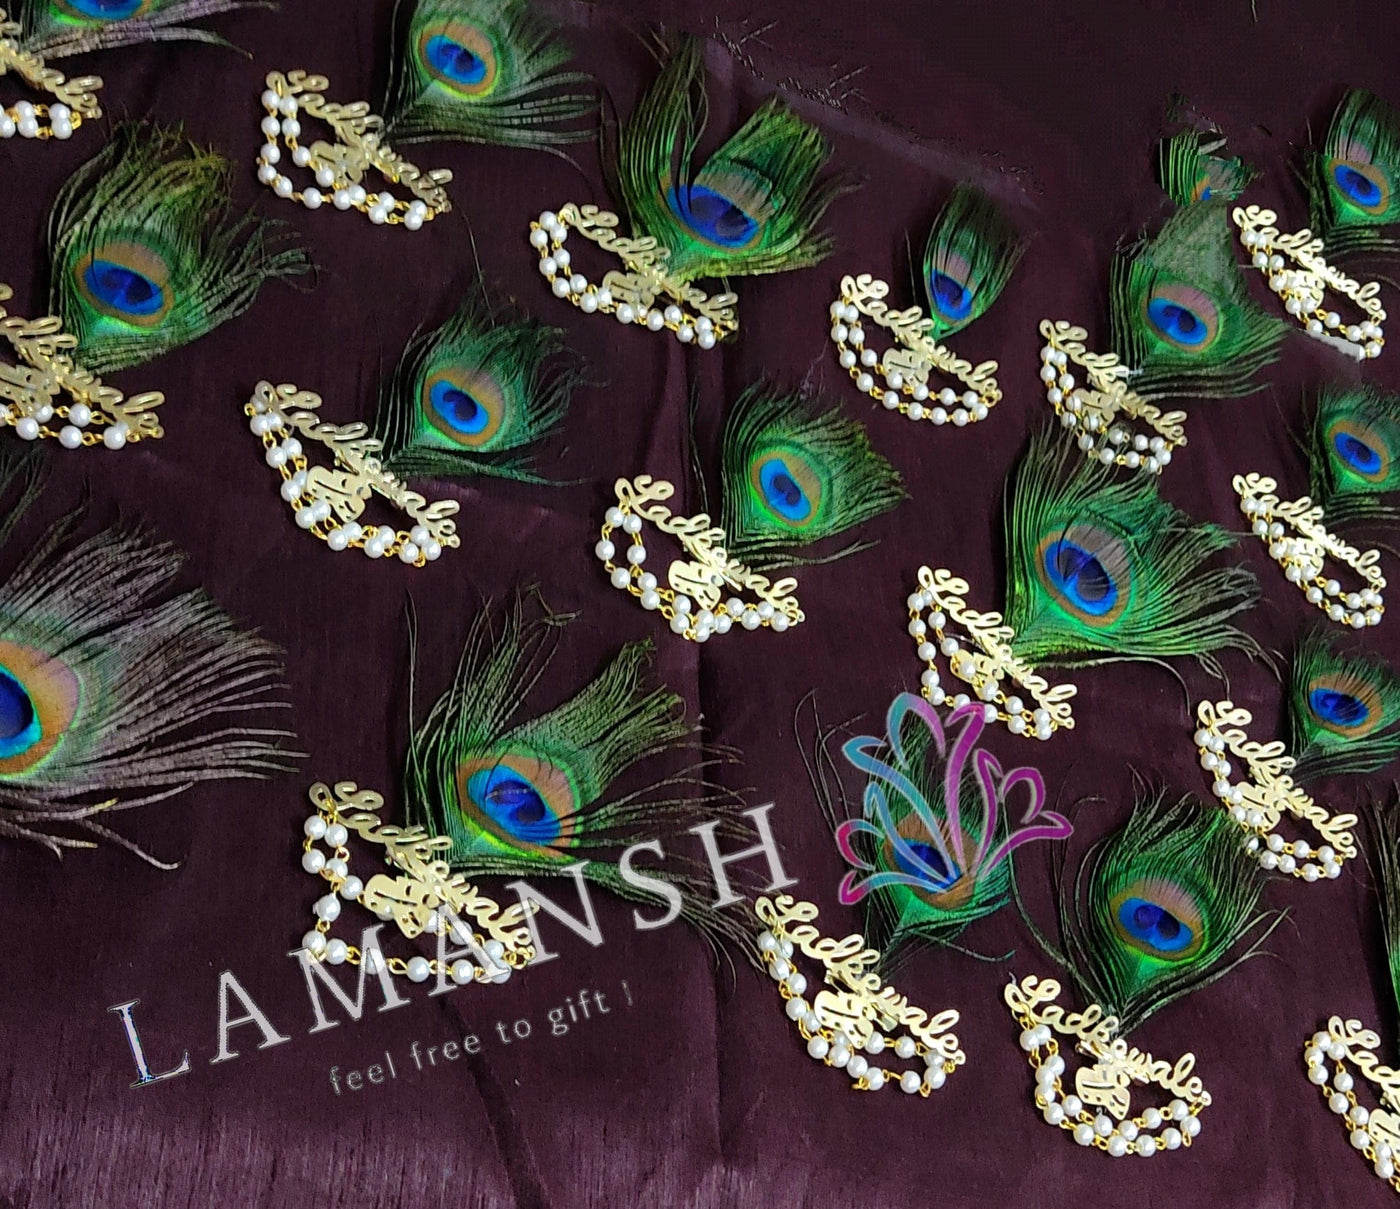 LAMANSH Broaches Gold-White / Metal / 16 LAMANSH® Pack of 16 Ladkewale Brooches with Morpankh for Barati in wedding / Brooches for Guests in Shaadi🎉